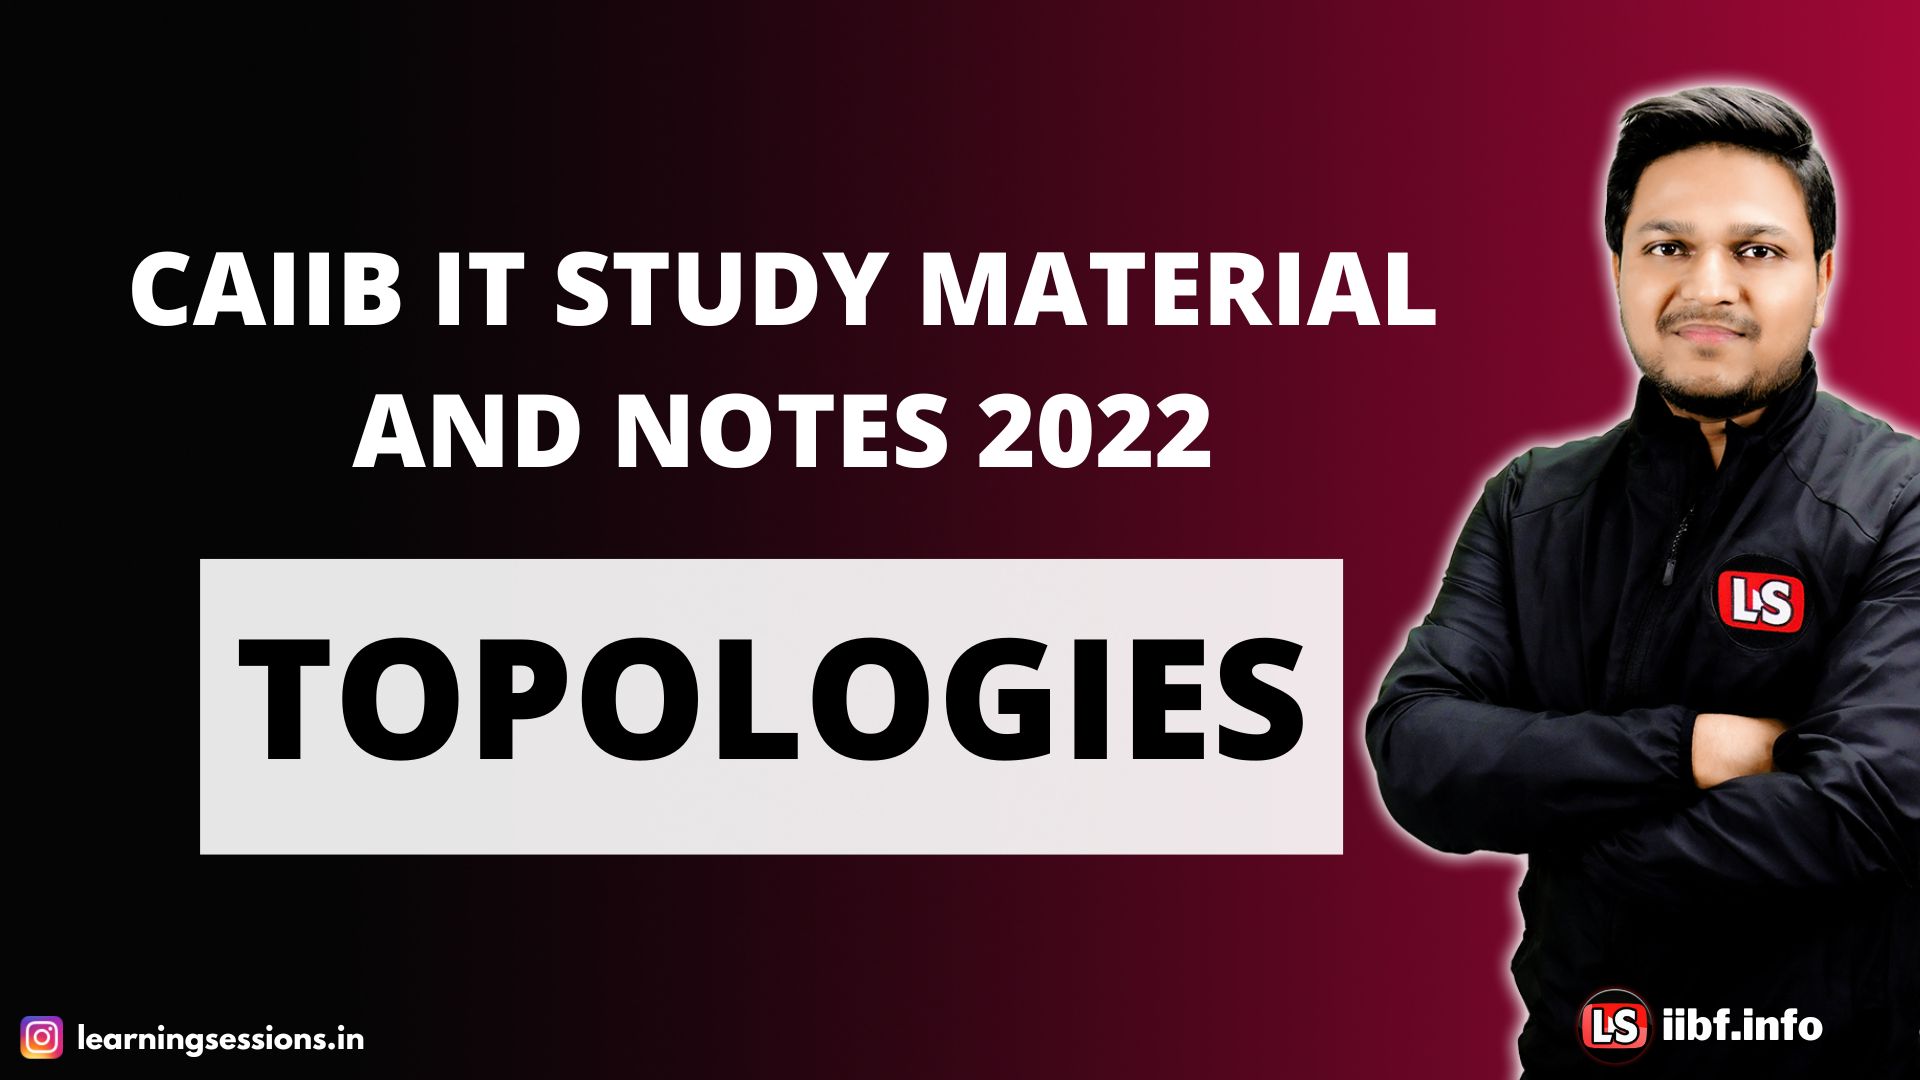 TOPOLOGIES | CAIIB IT STUDY MATERIAL AND NOTES 2022